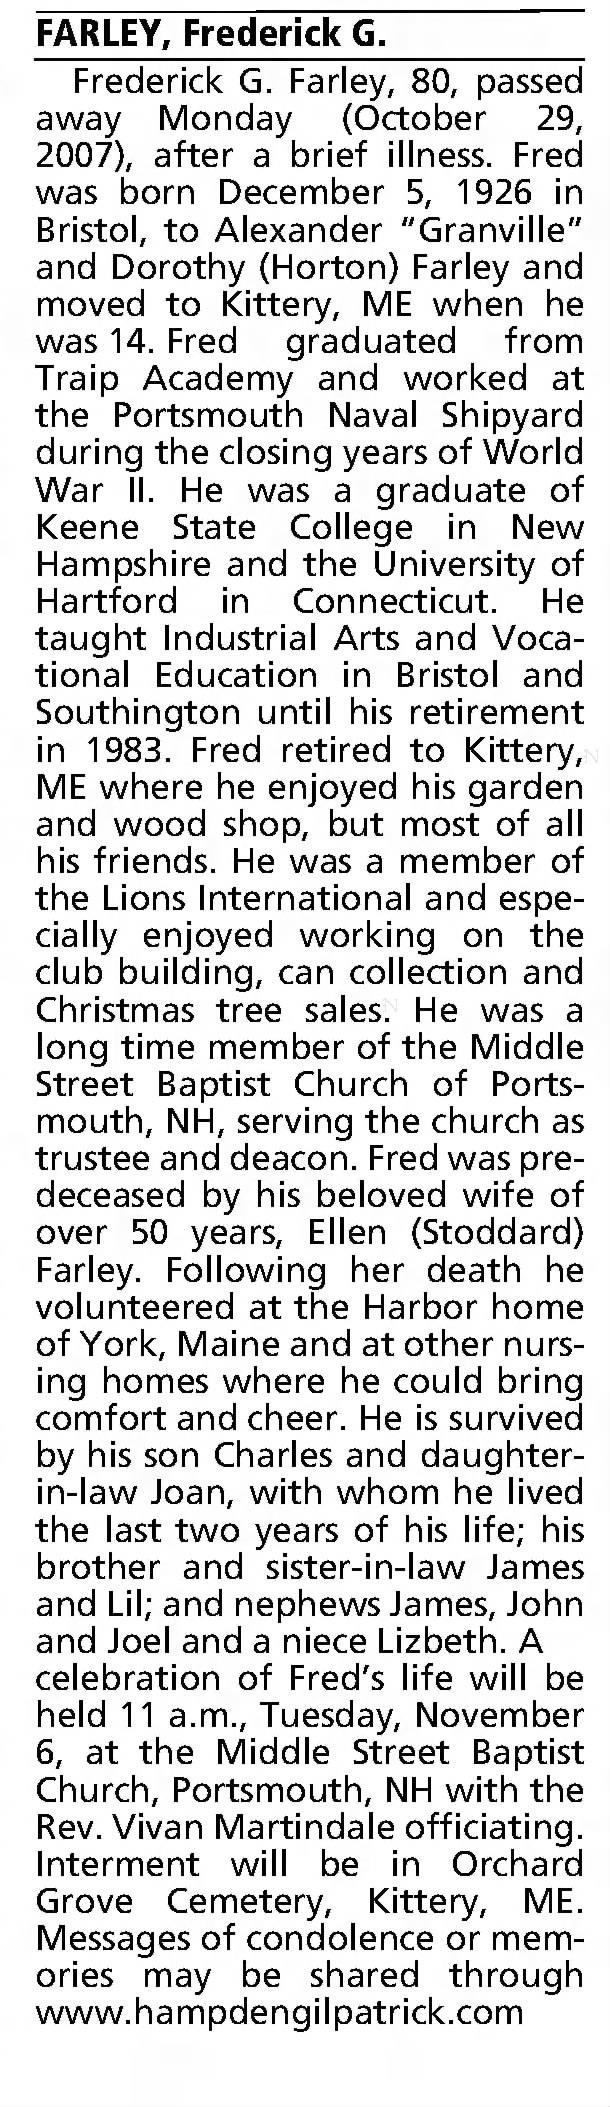 Farley, Frederick G - Obituary - Hartford Courant
Hartford, Connecticut
 Wednesday, October 31, 2007